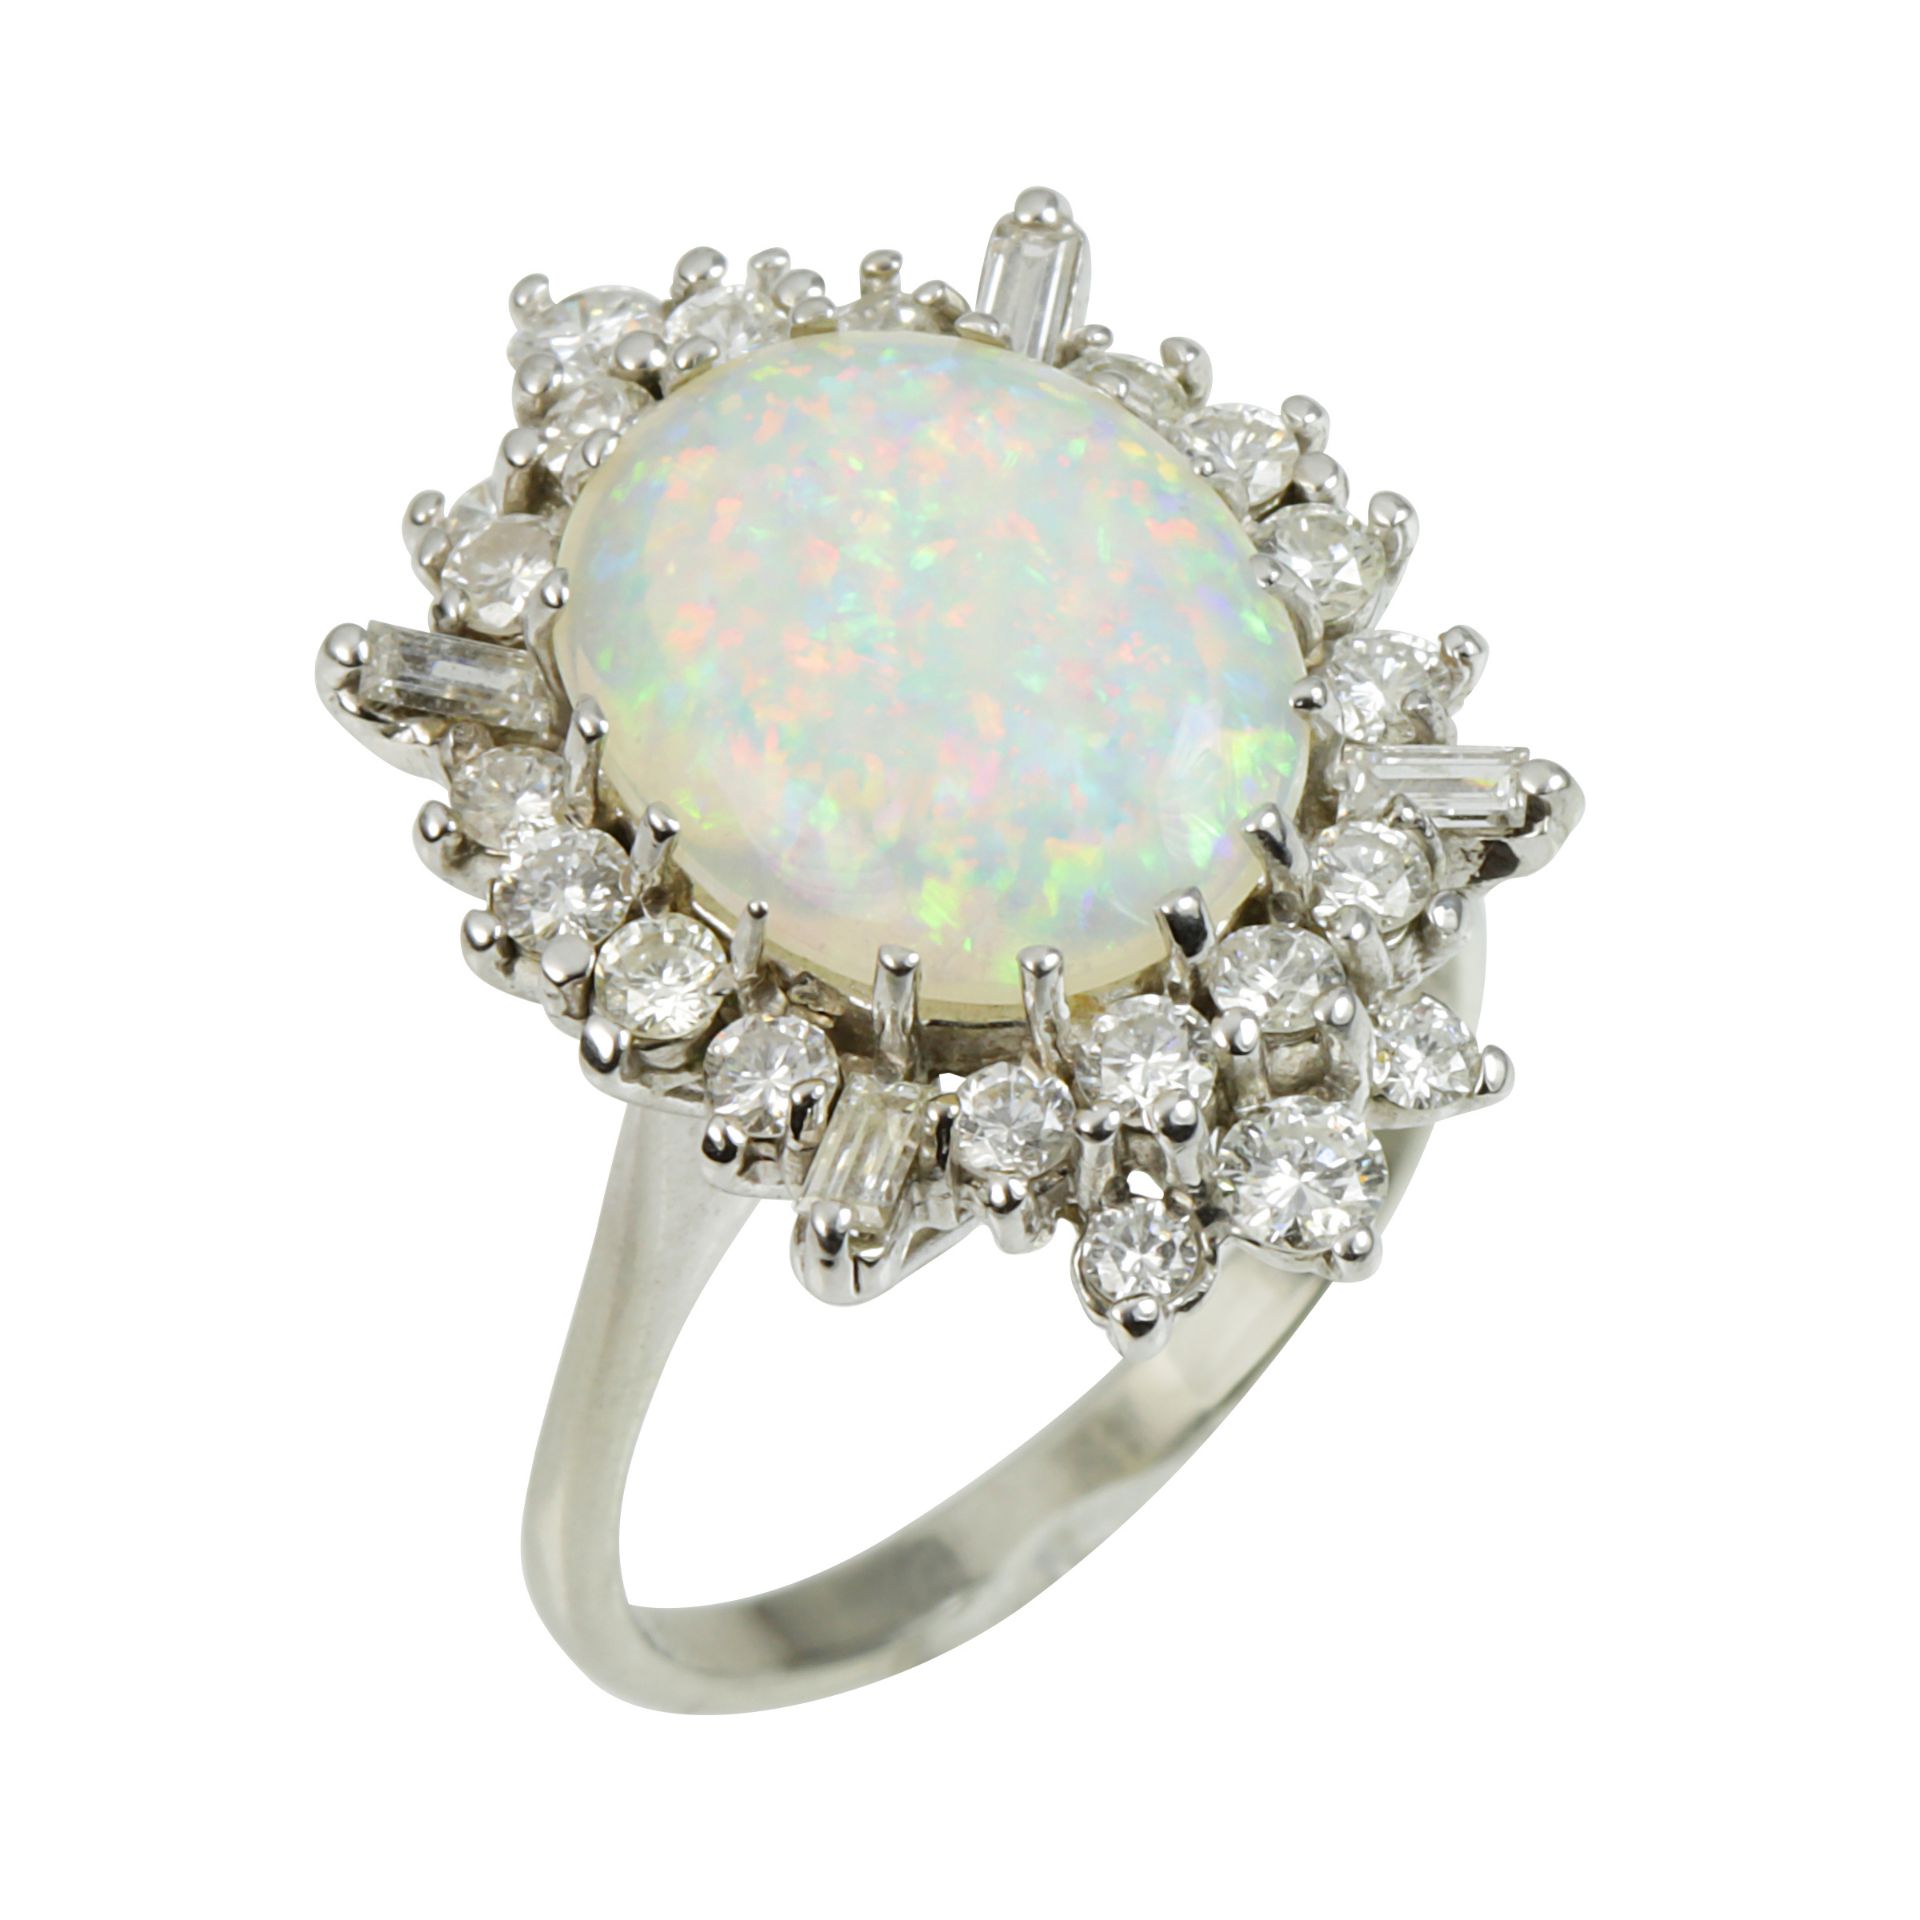 AN OPAL AND DIAMOND CLUSTER RING in 18ct white gold, set with a central cabochon opal within a